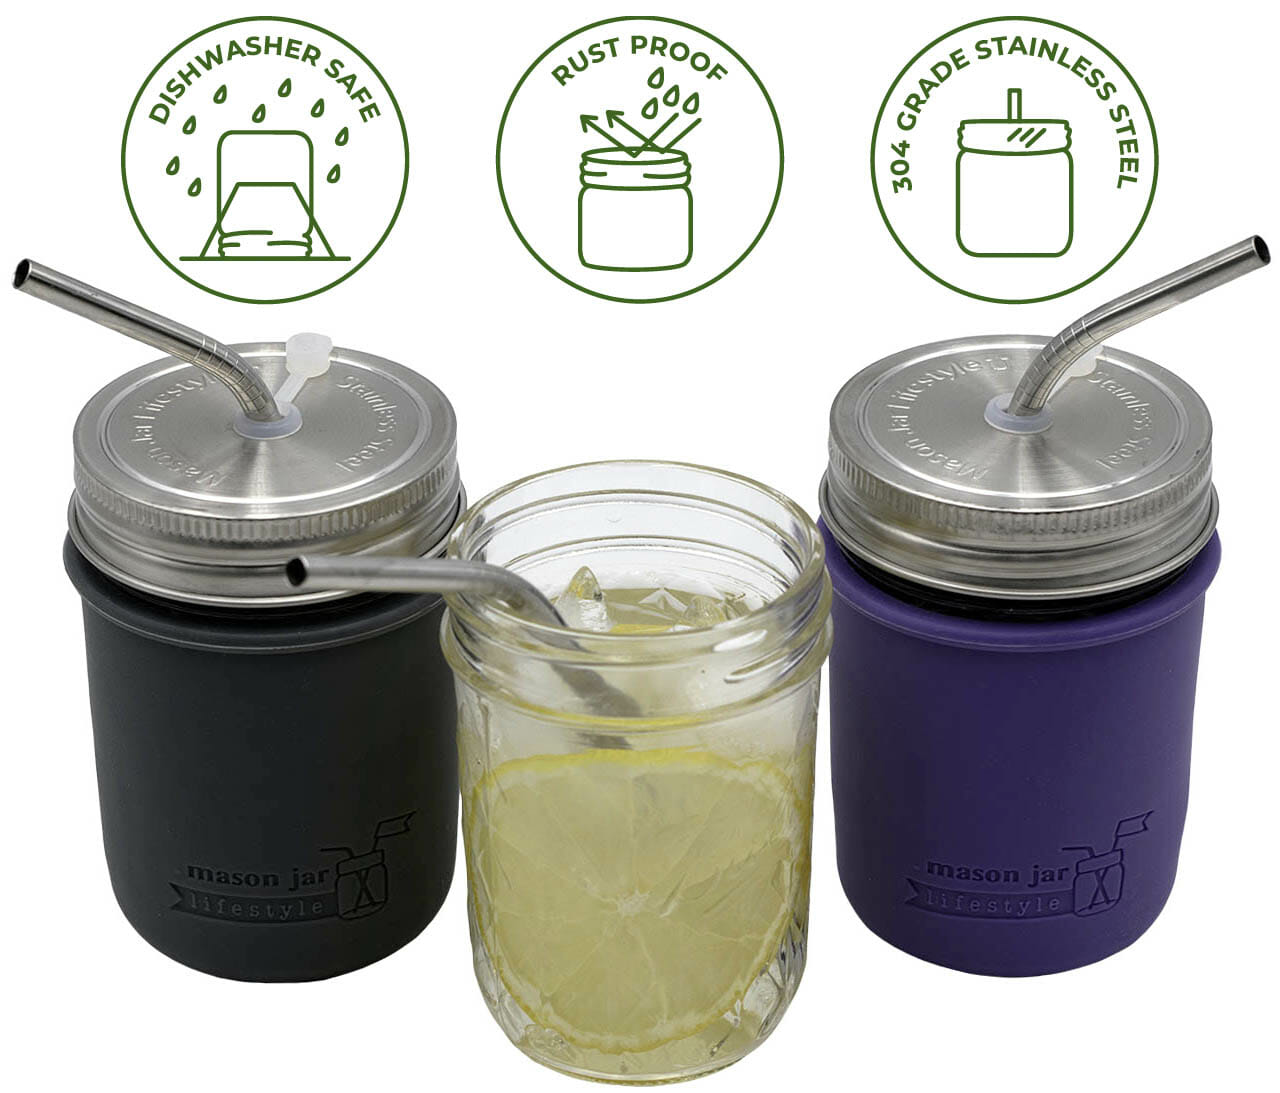 mason-jar-lifestyle-rust-proof-stainless-steel-straw-hole-lids-regular-mouth-mason-jars-silicone-grommet-short-thin-bent-straws-silicone-sleeves-koozies-icons